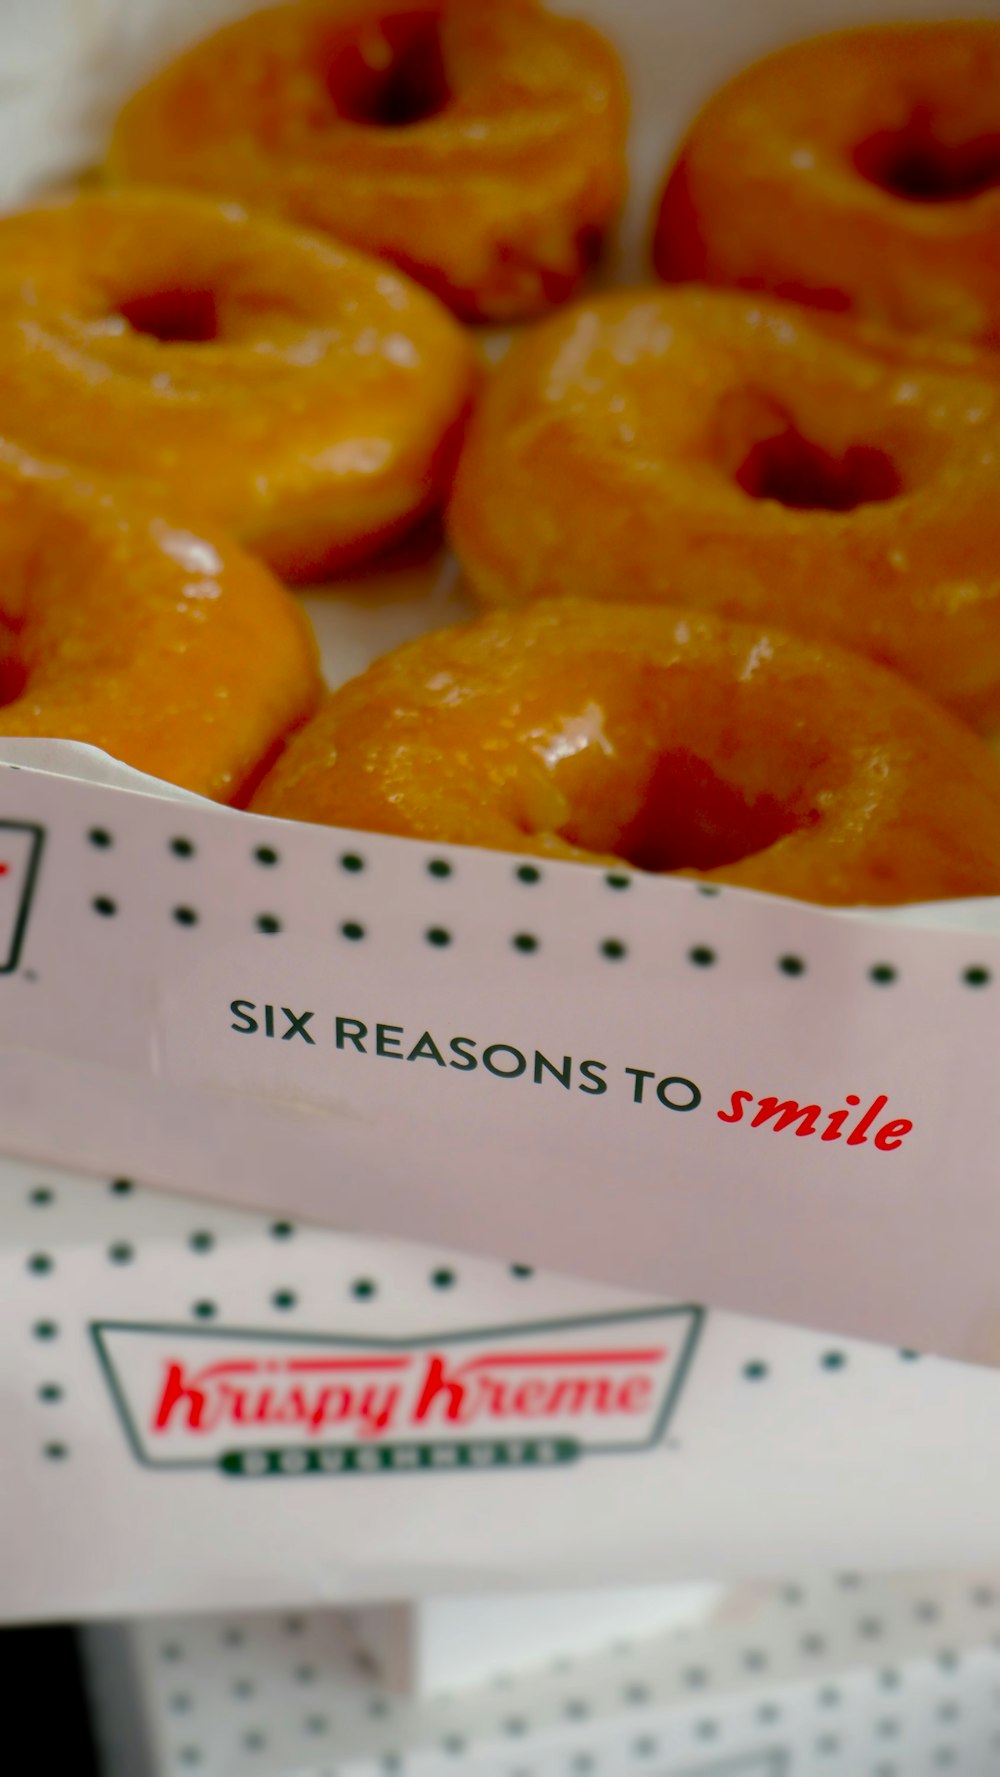 a box of six reason to smile glazed donuts